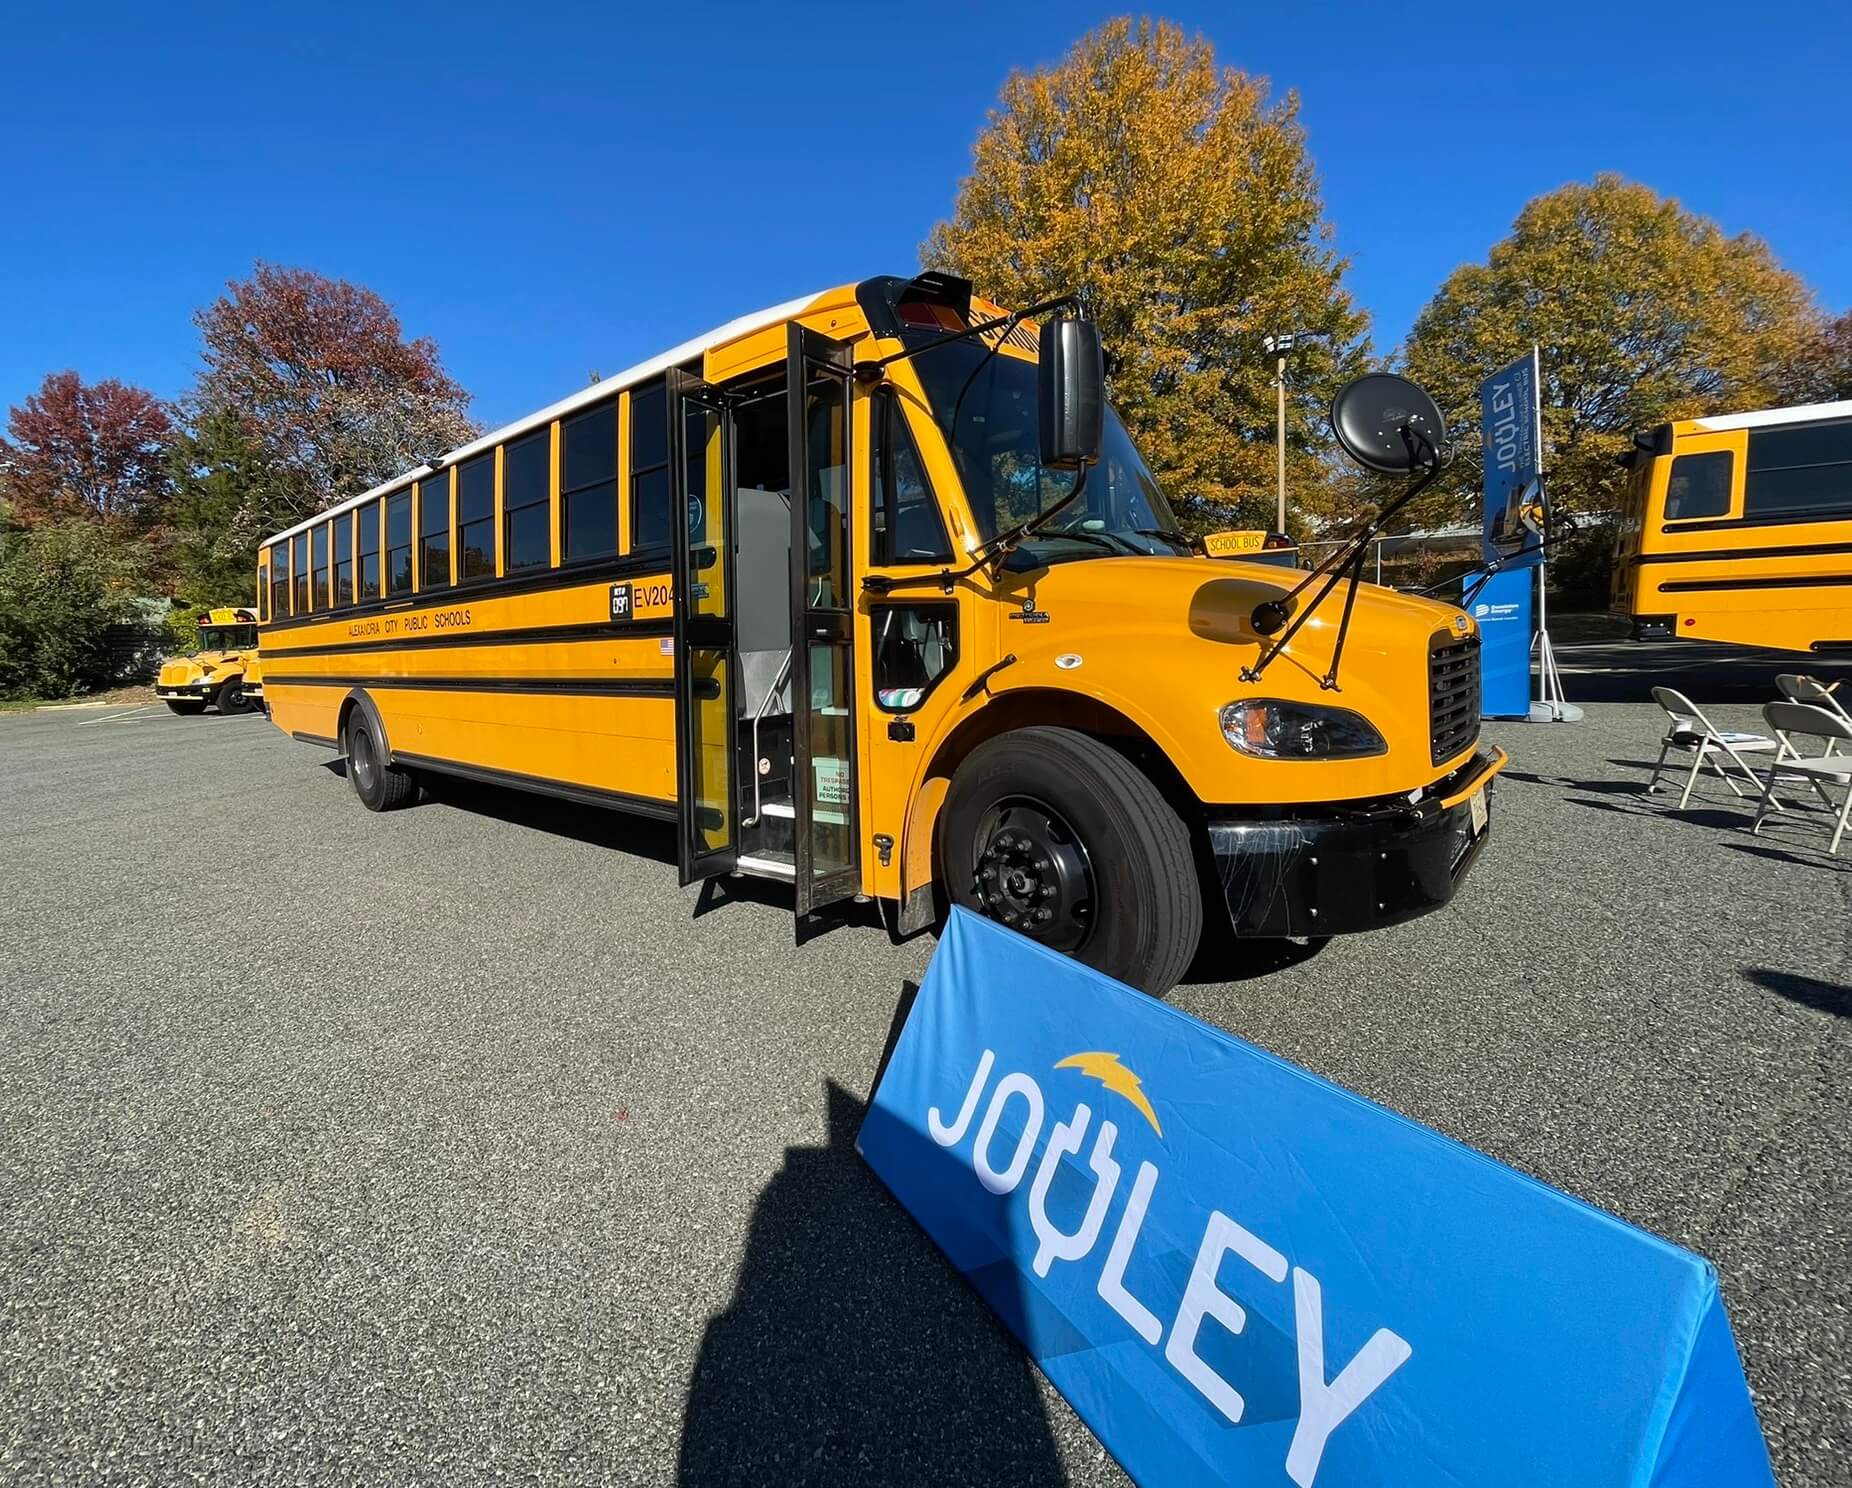 An electric school bus rolled out from Alexandria Public Schools